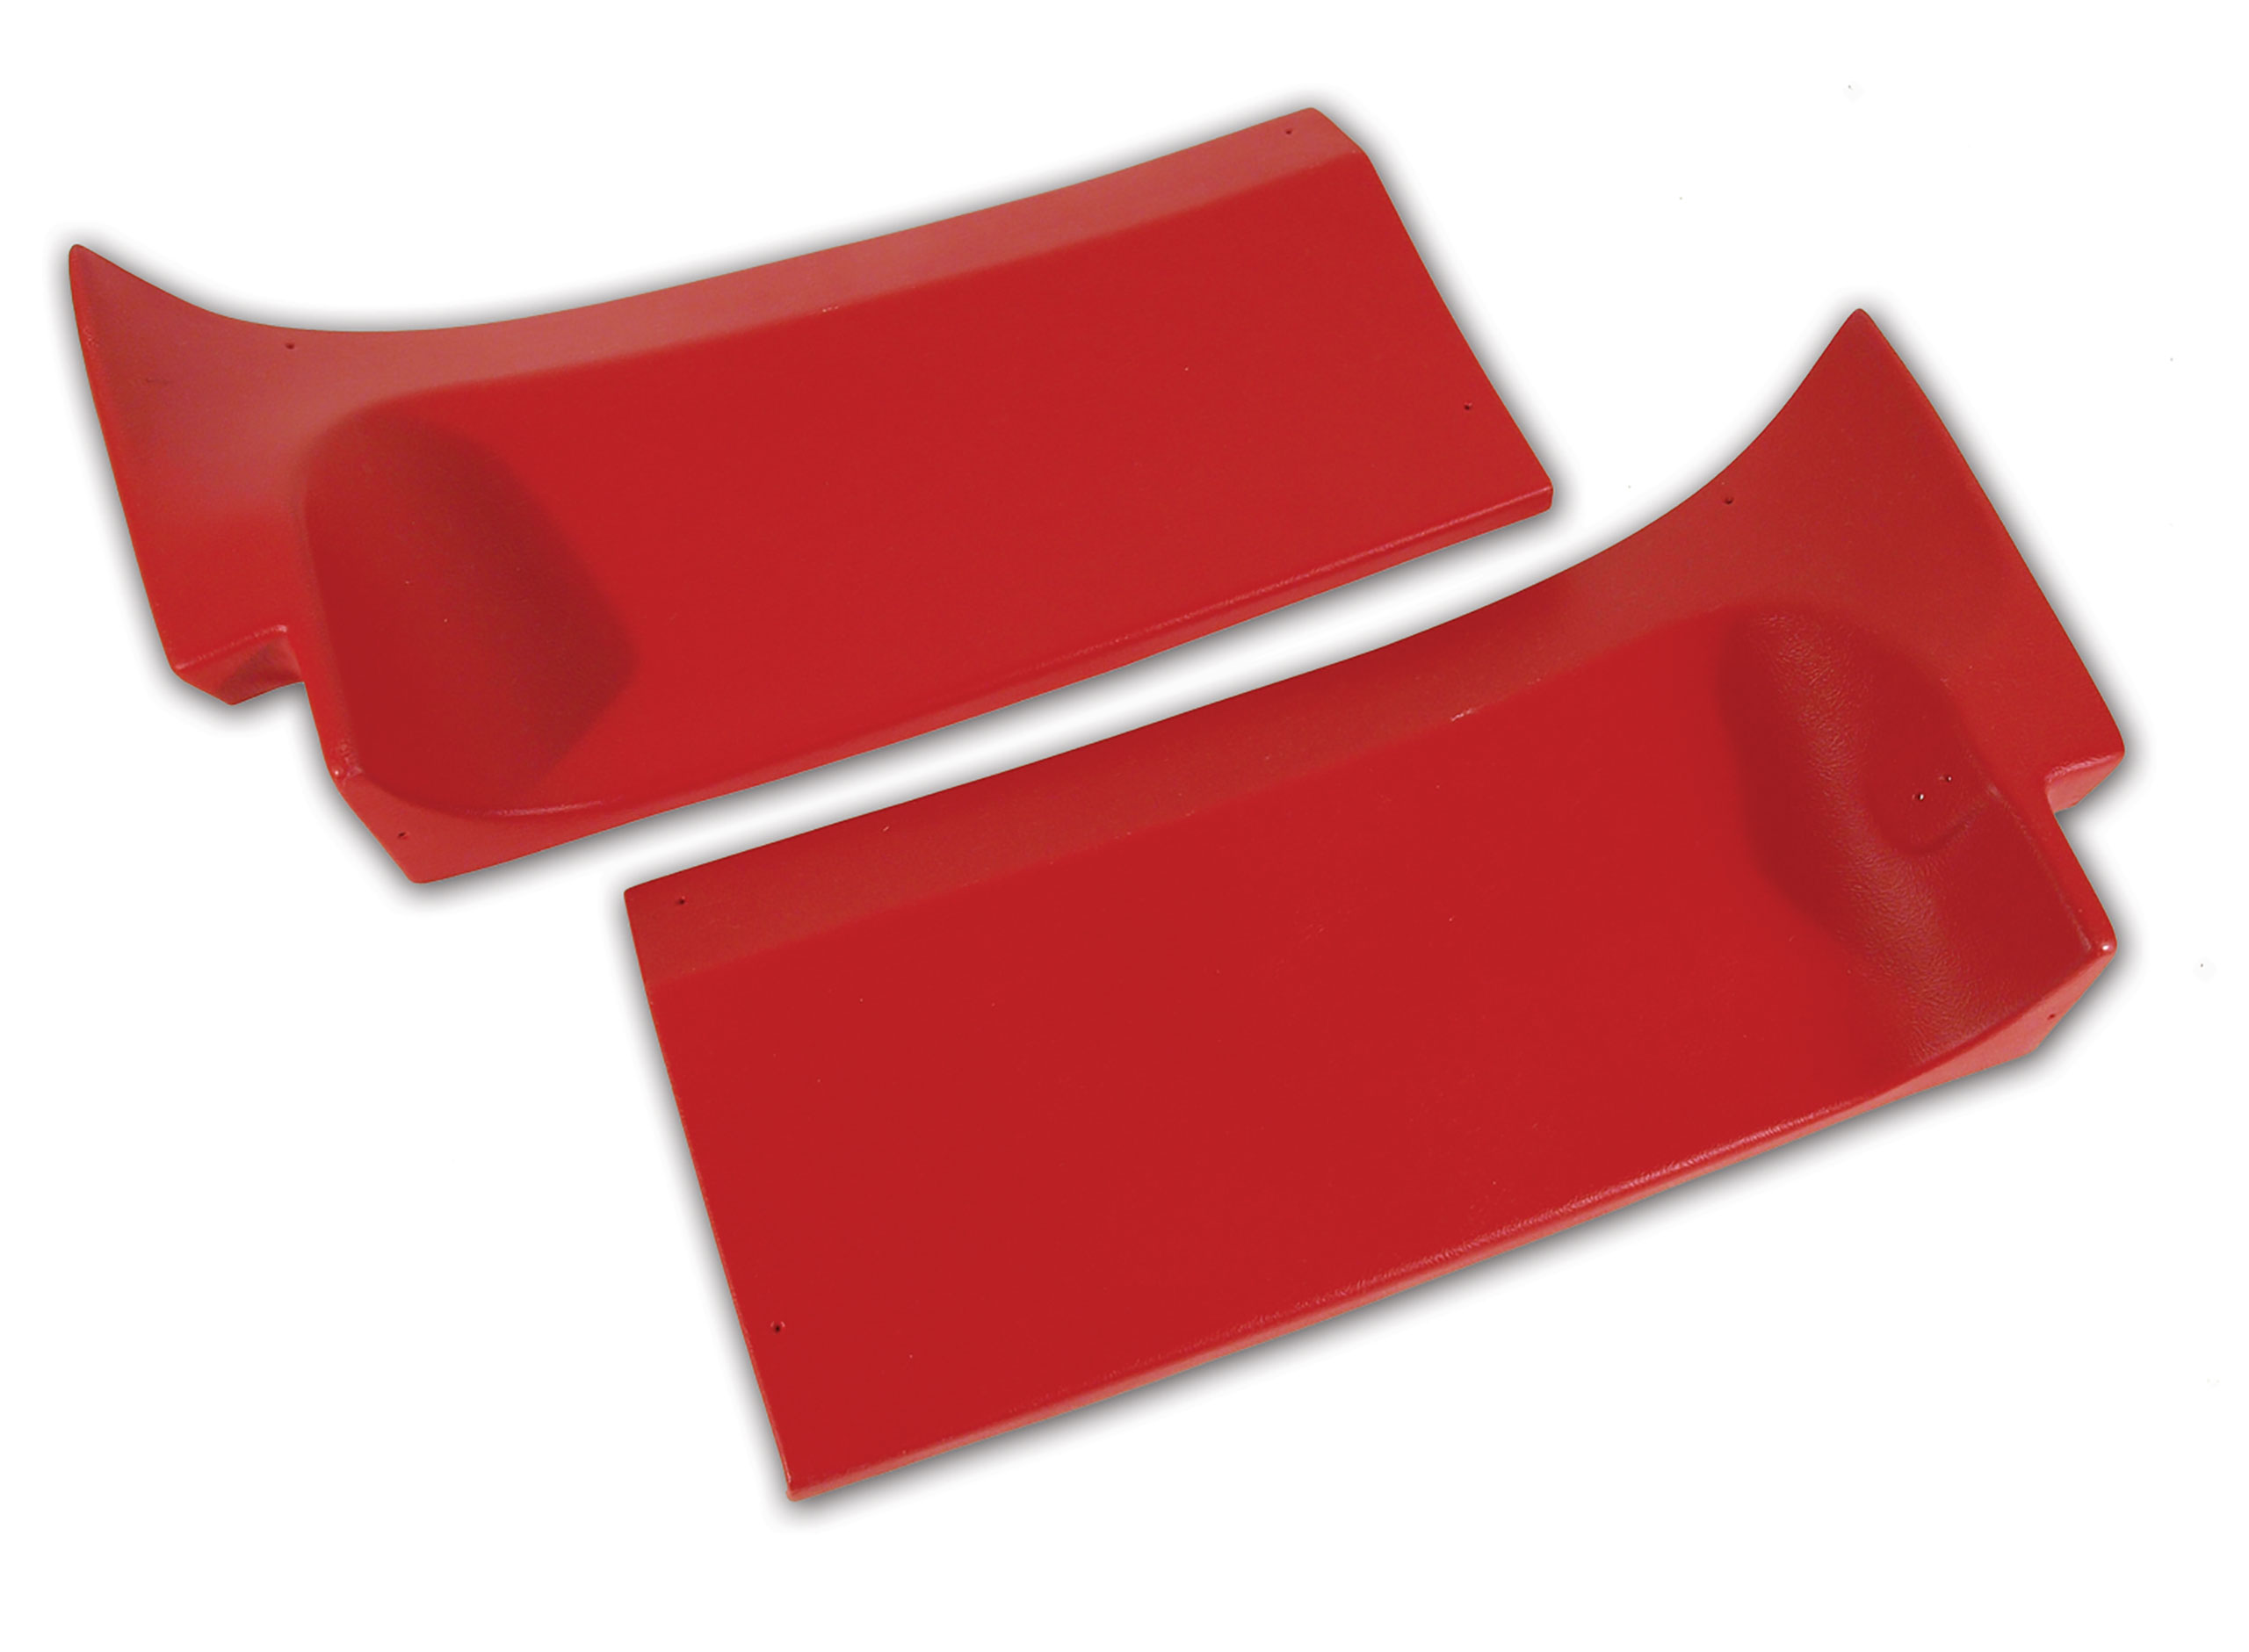 1977 Corvette C3 Rear Coupe Roof Panels- Red CA-413424 